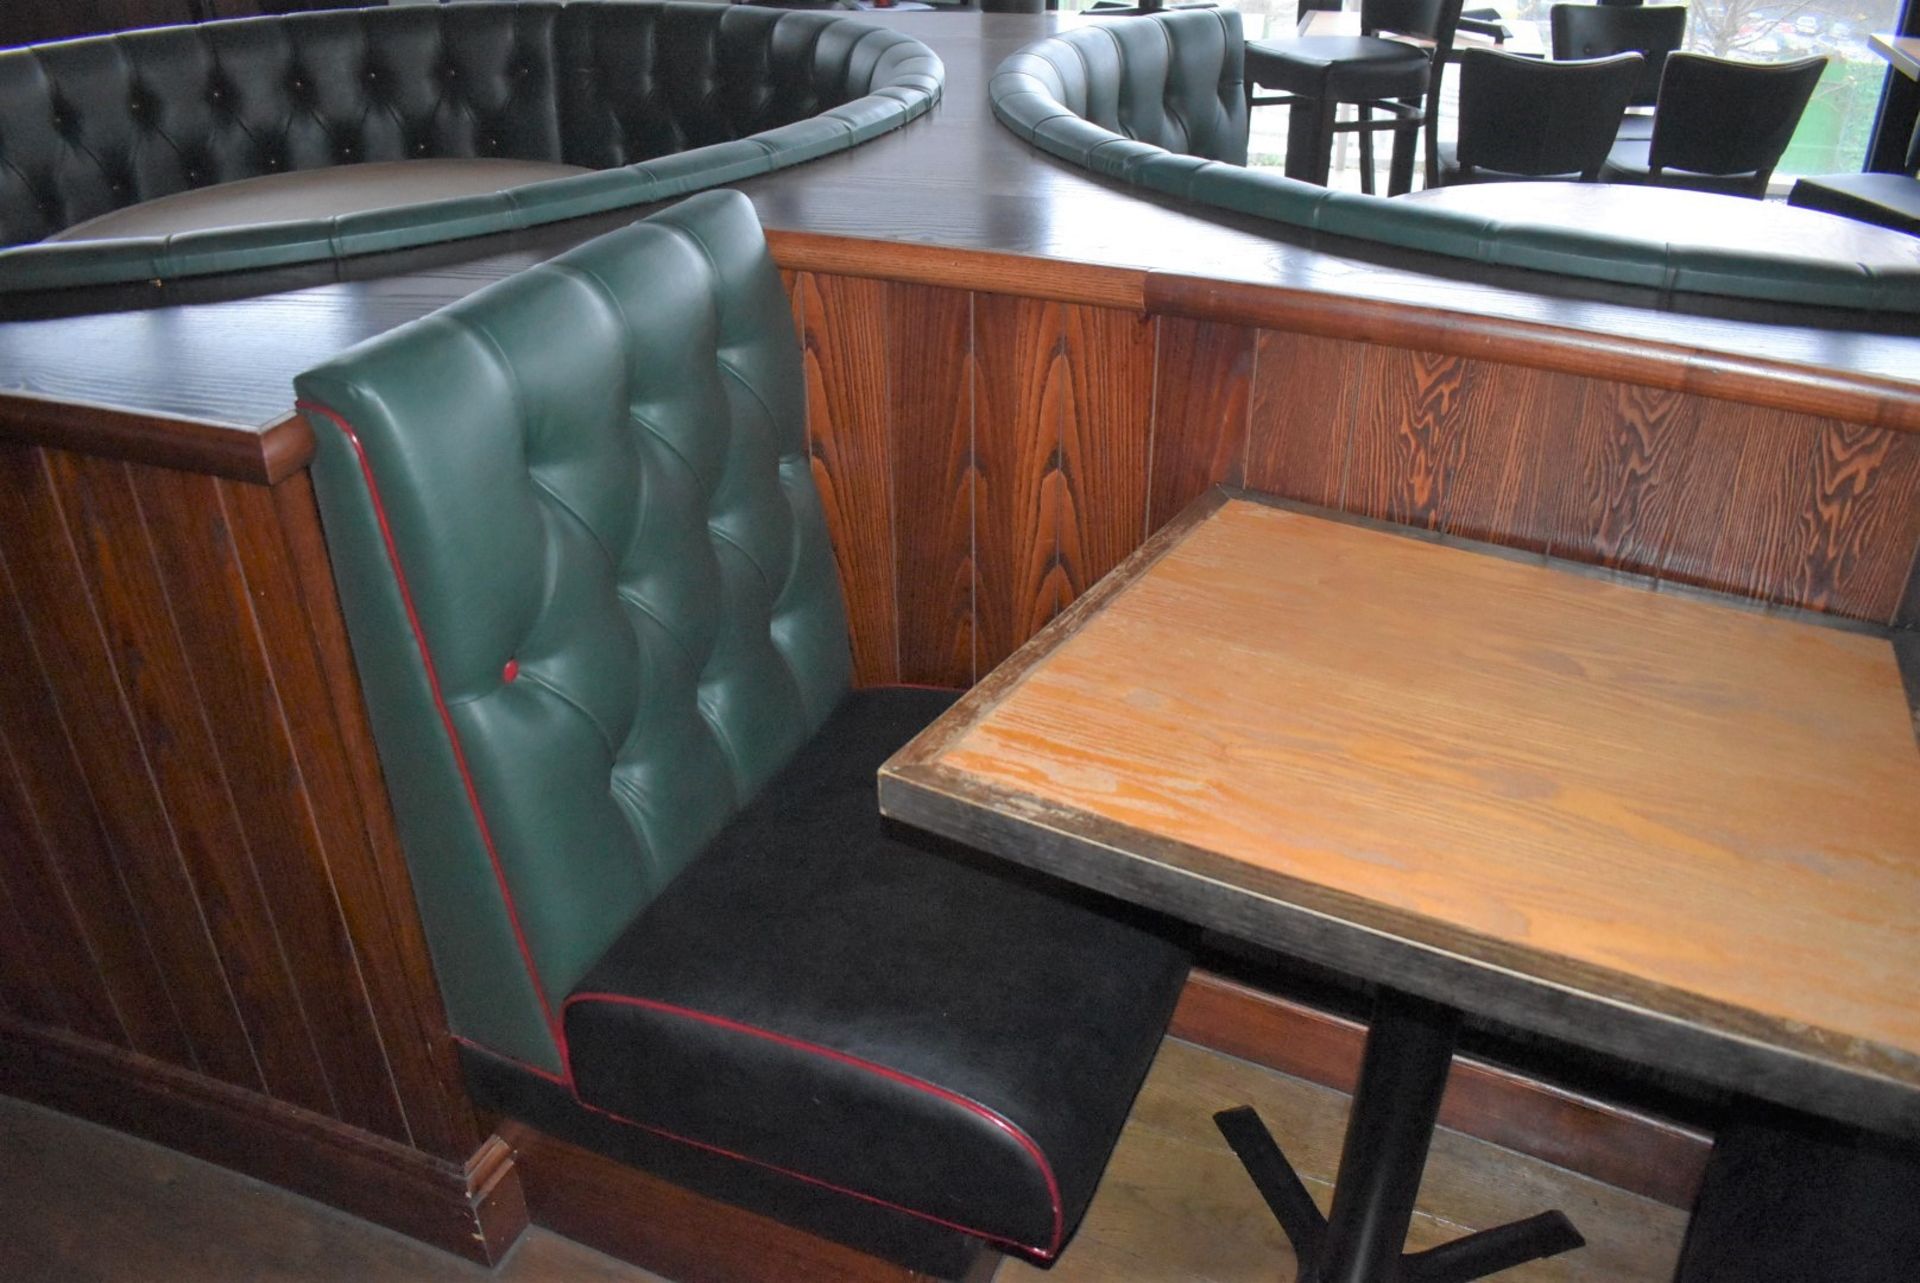 3 x Sections of Restaurant Single Seat Booth Seating With 2 x Tables - Image 2 of 9